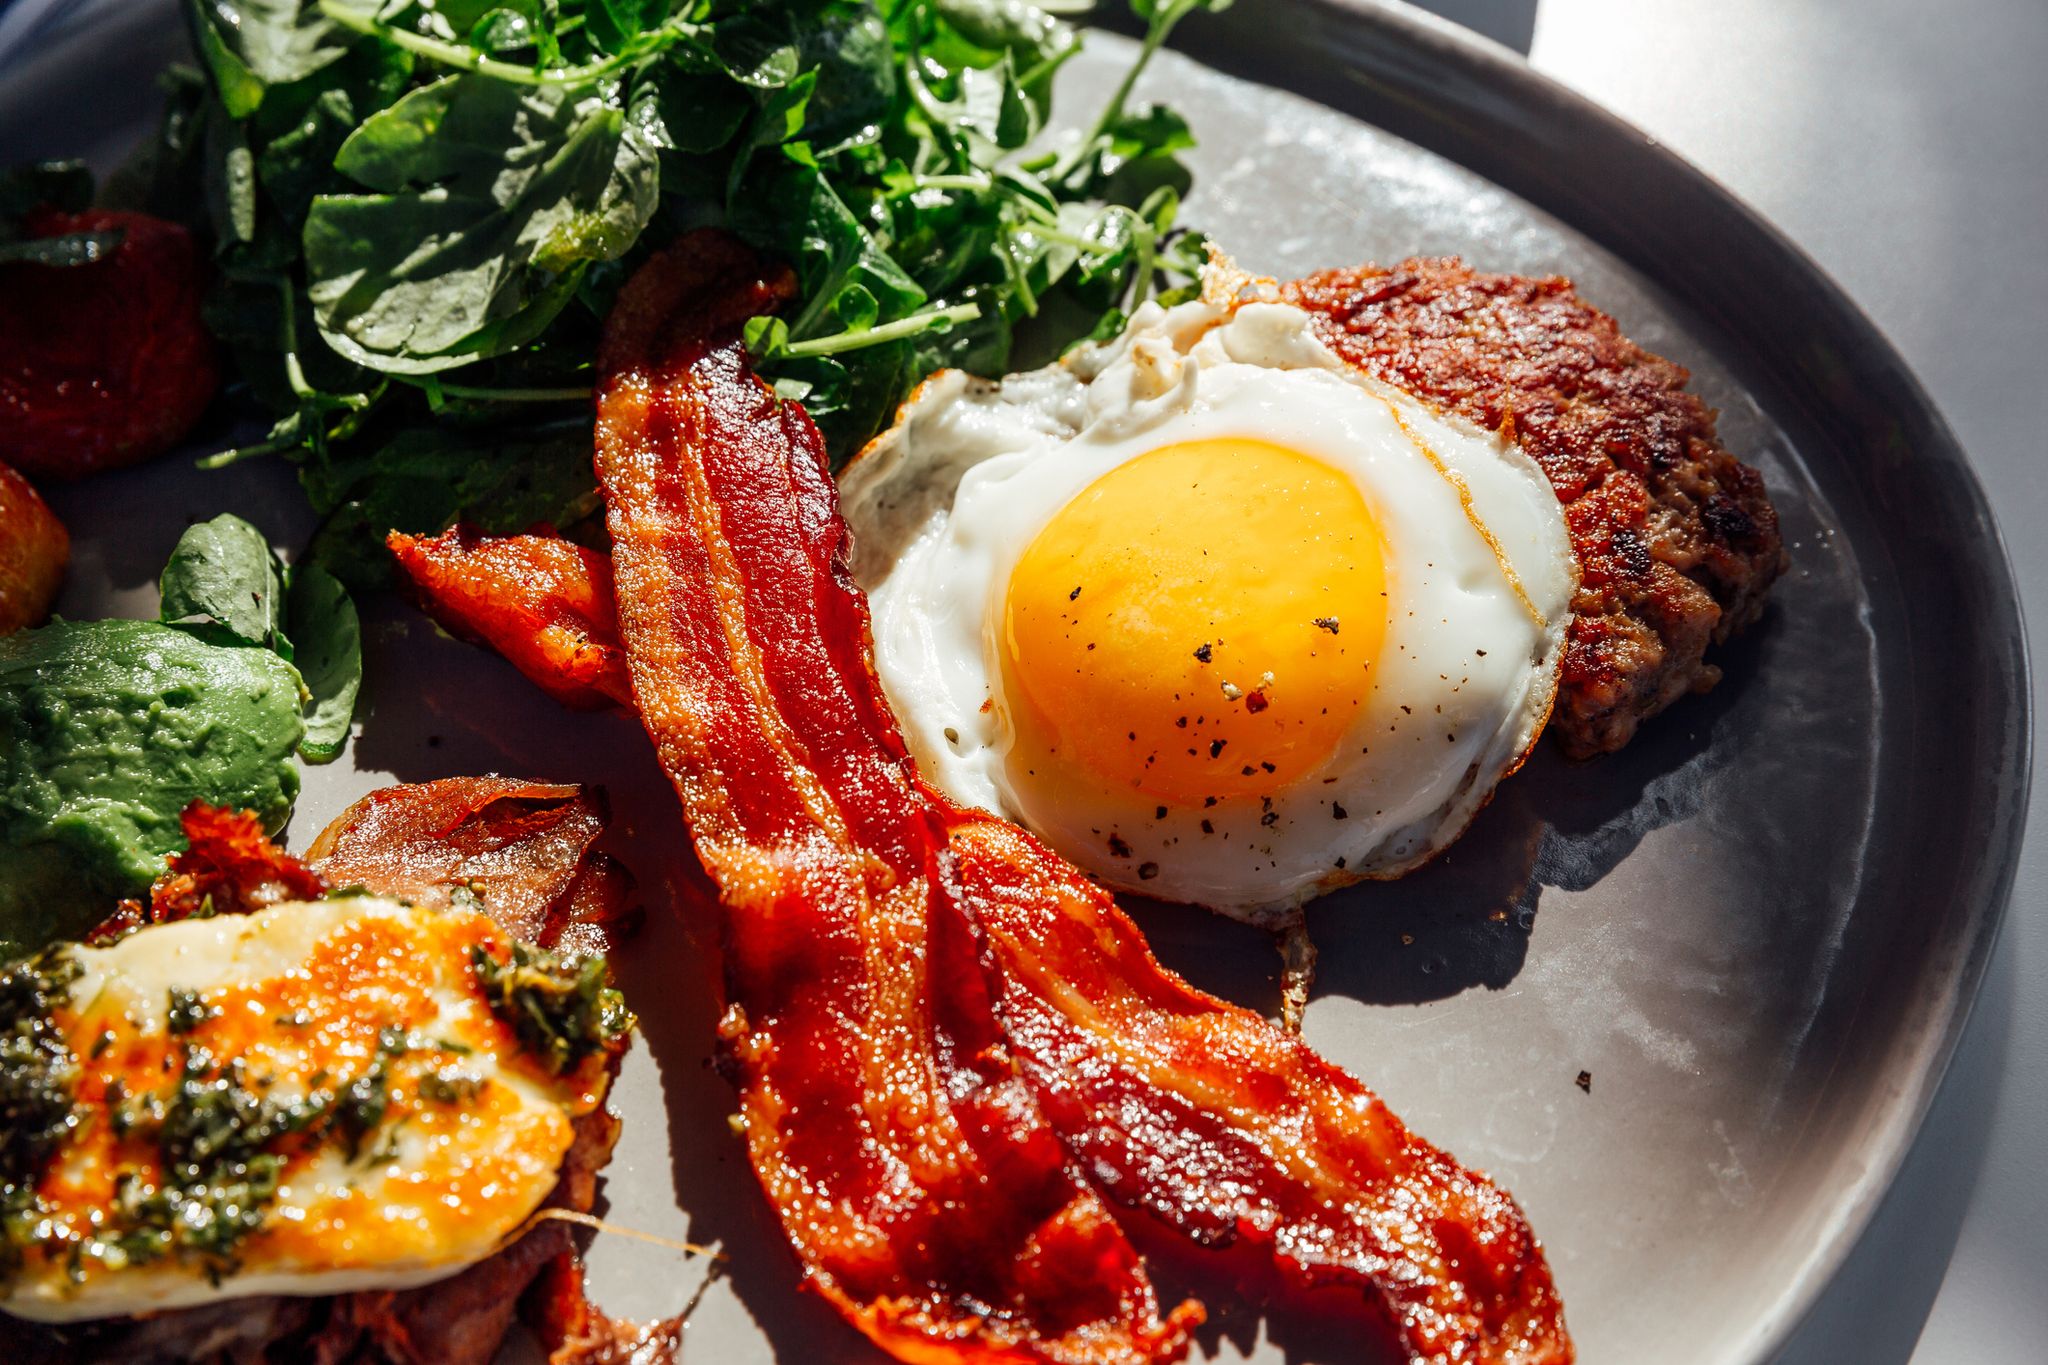 https://hips.hearstapps.com/hmg-prod/images/keto-breakfast-with-fried-egg-bacon-cheese-ground-royalty-free-image-1677078483.jpg?resize=2048:*